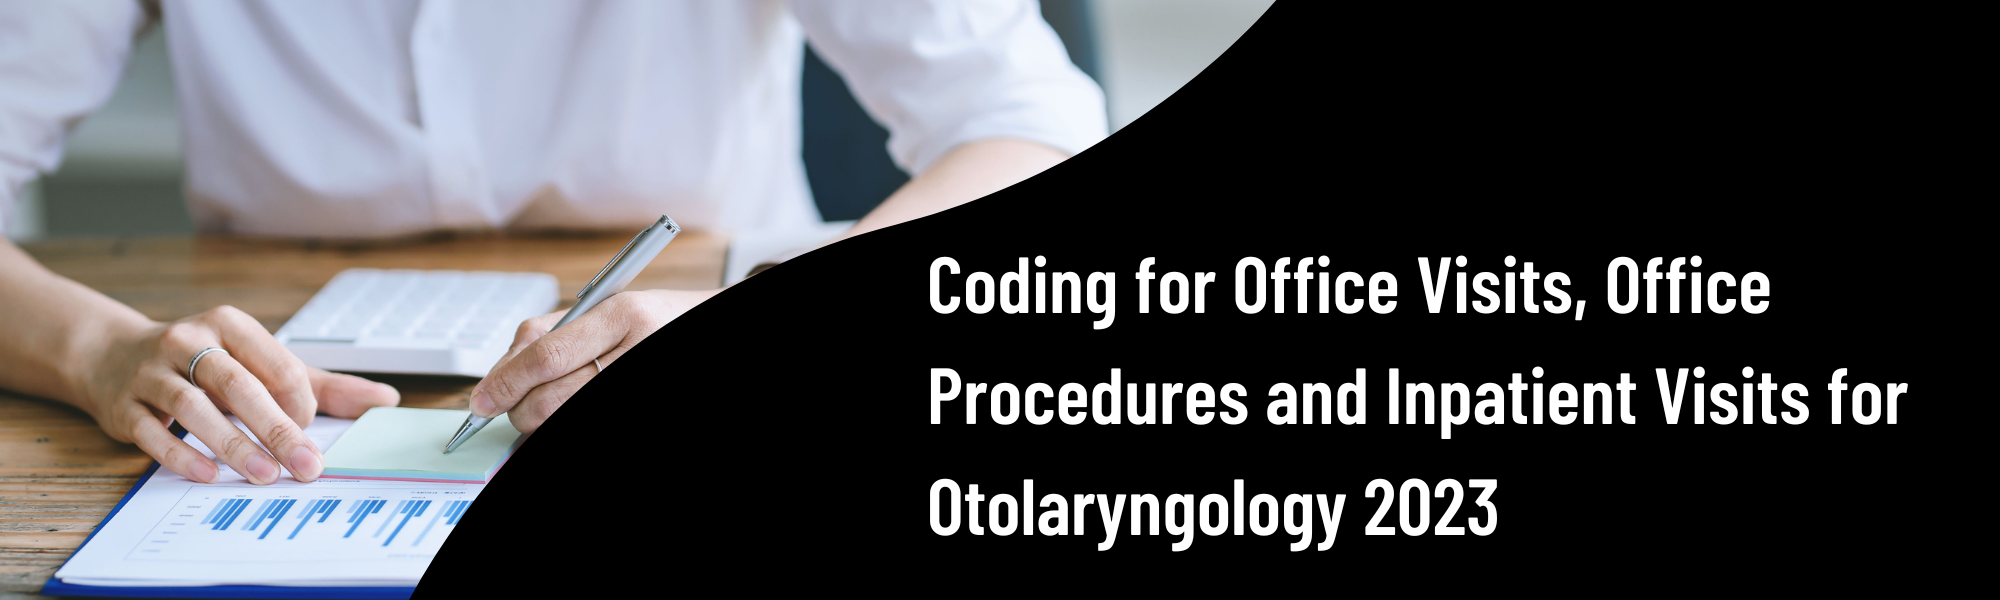 Coding for Office Visits, Office Procedures and Inpatient Visits for Otolaryngology 2023